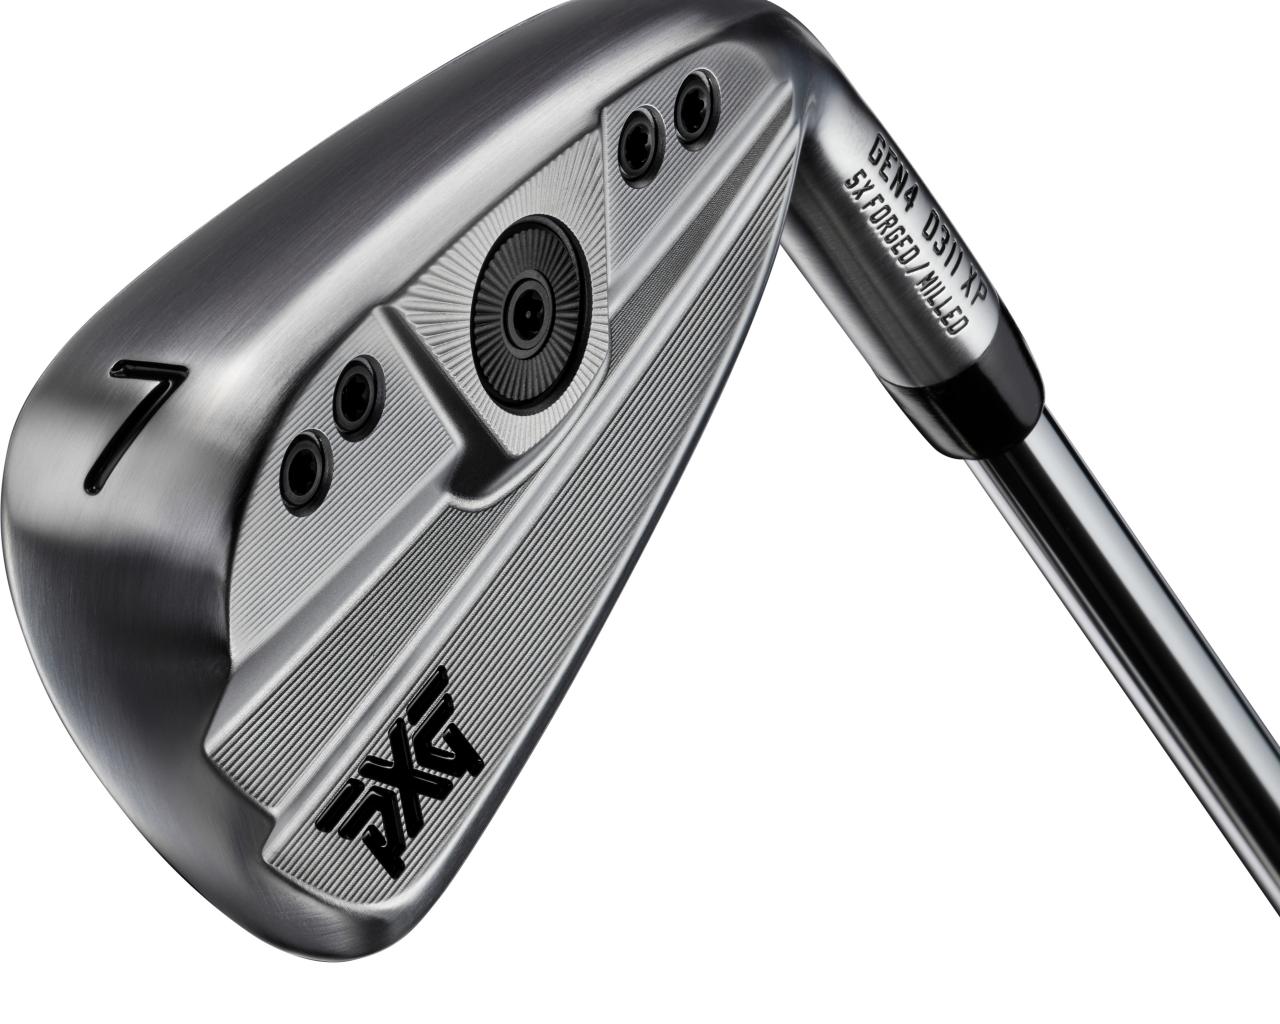 PXG's new GEN4 irons: Here's everything you need to know | Golf